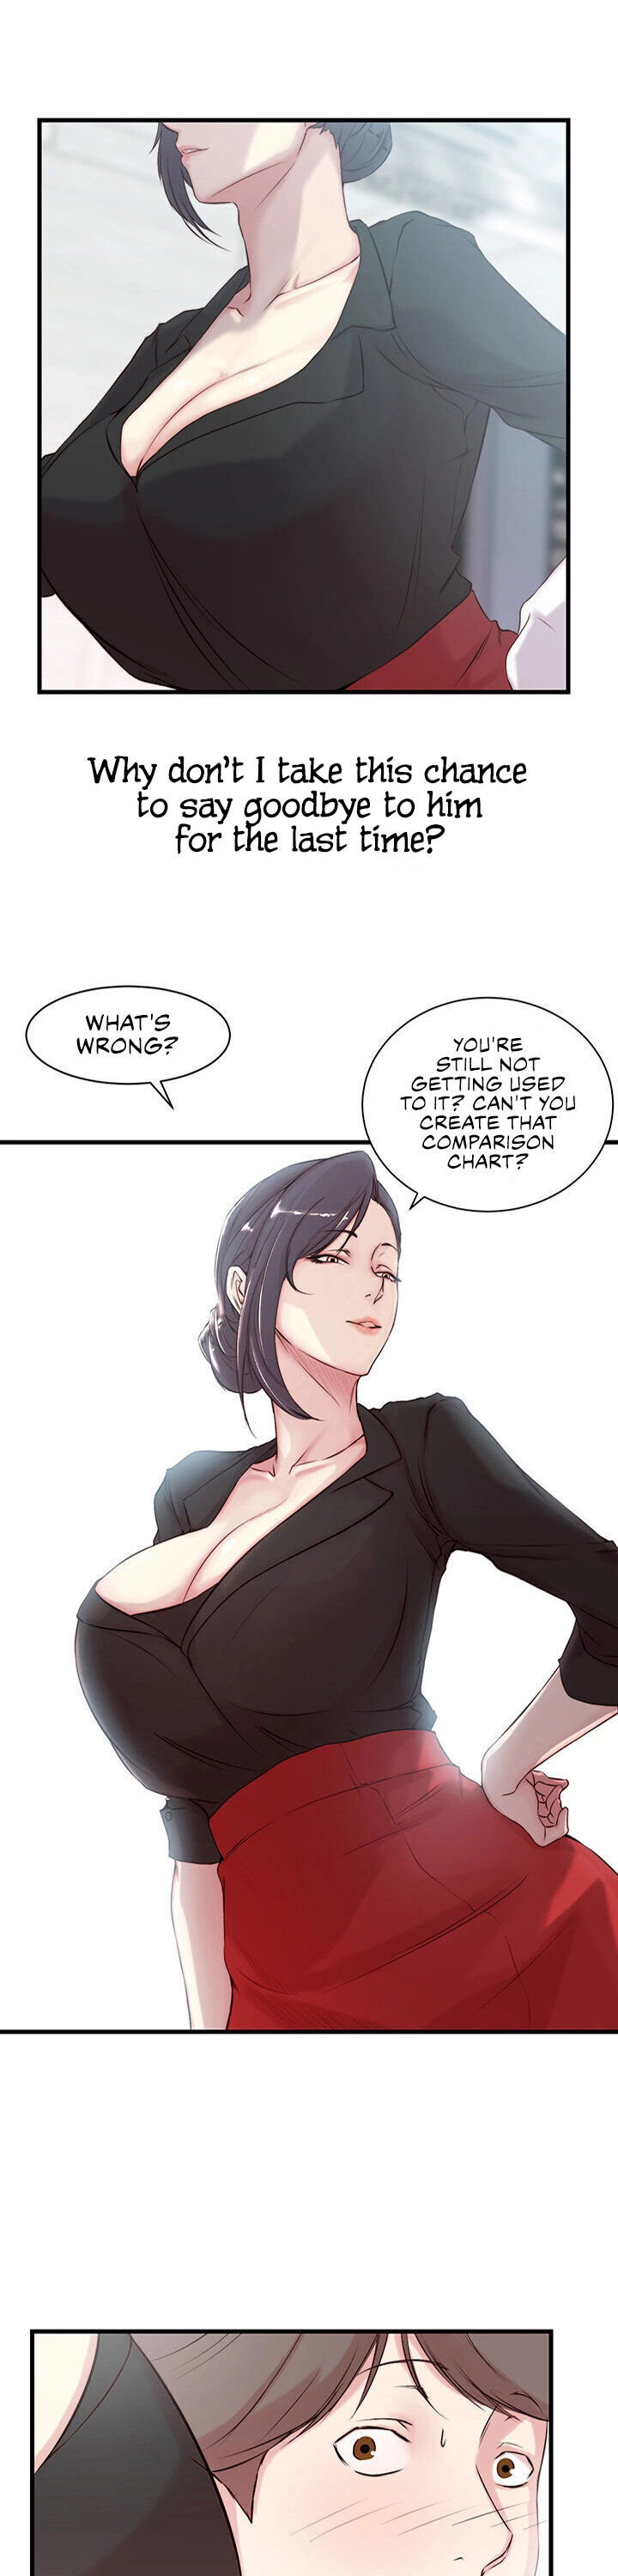 Sister-in-Law Manhwa - Chapter 3 Page 15